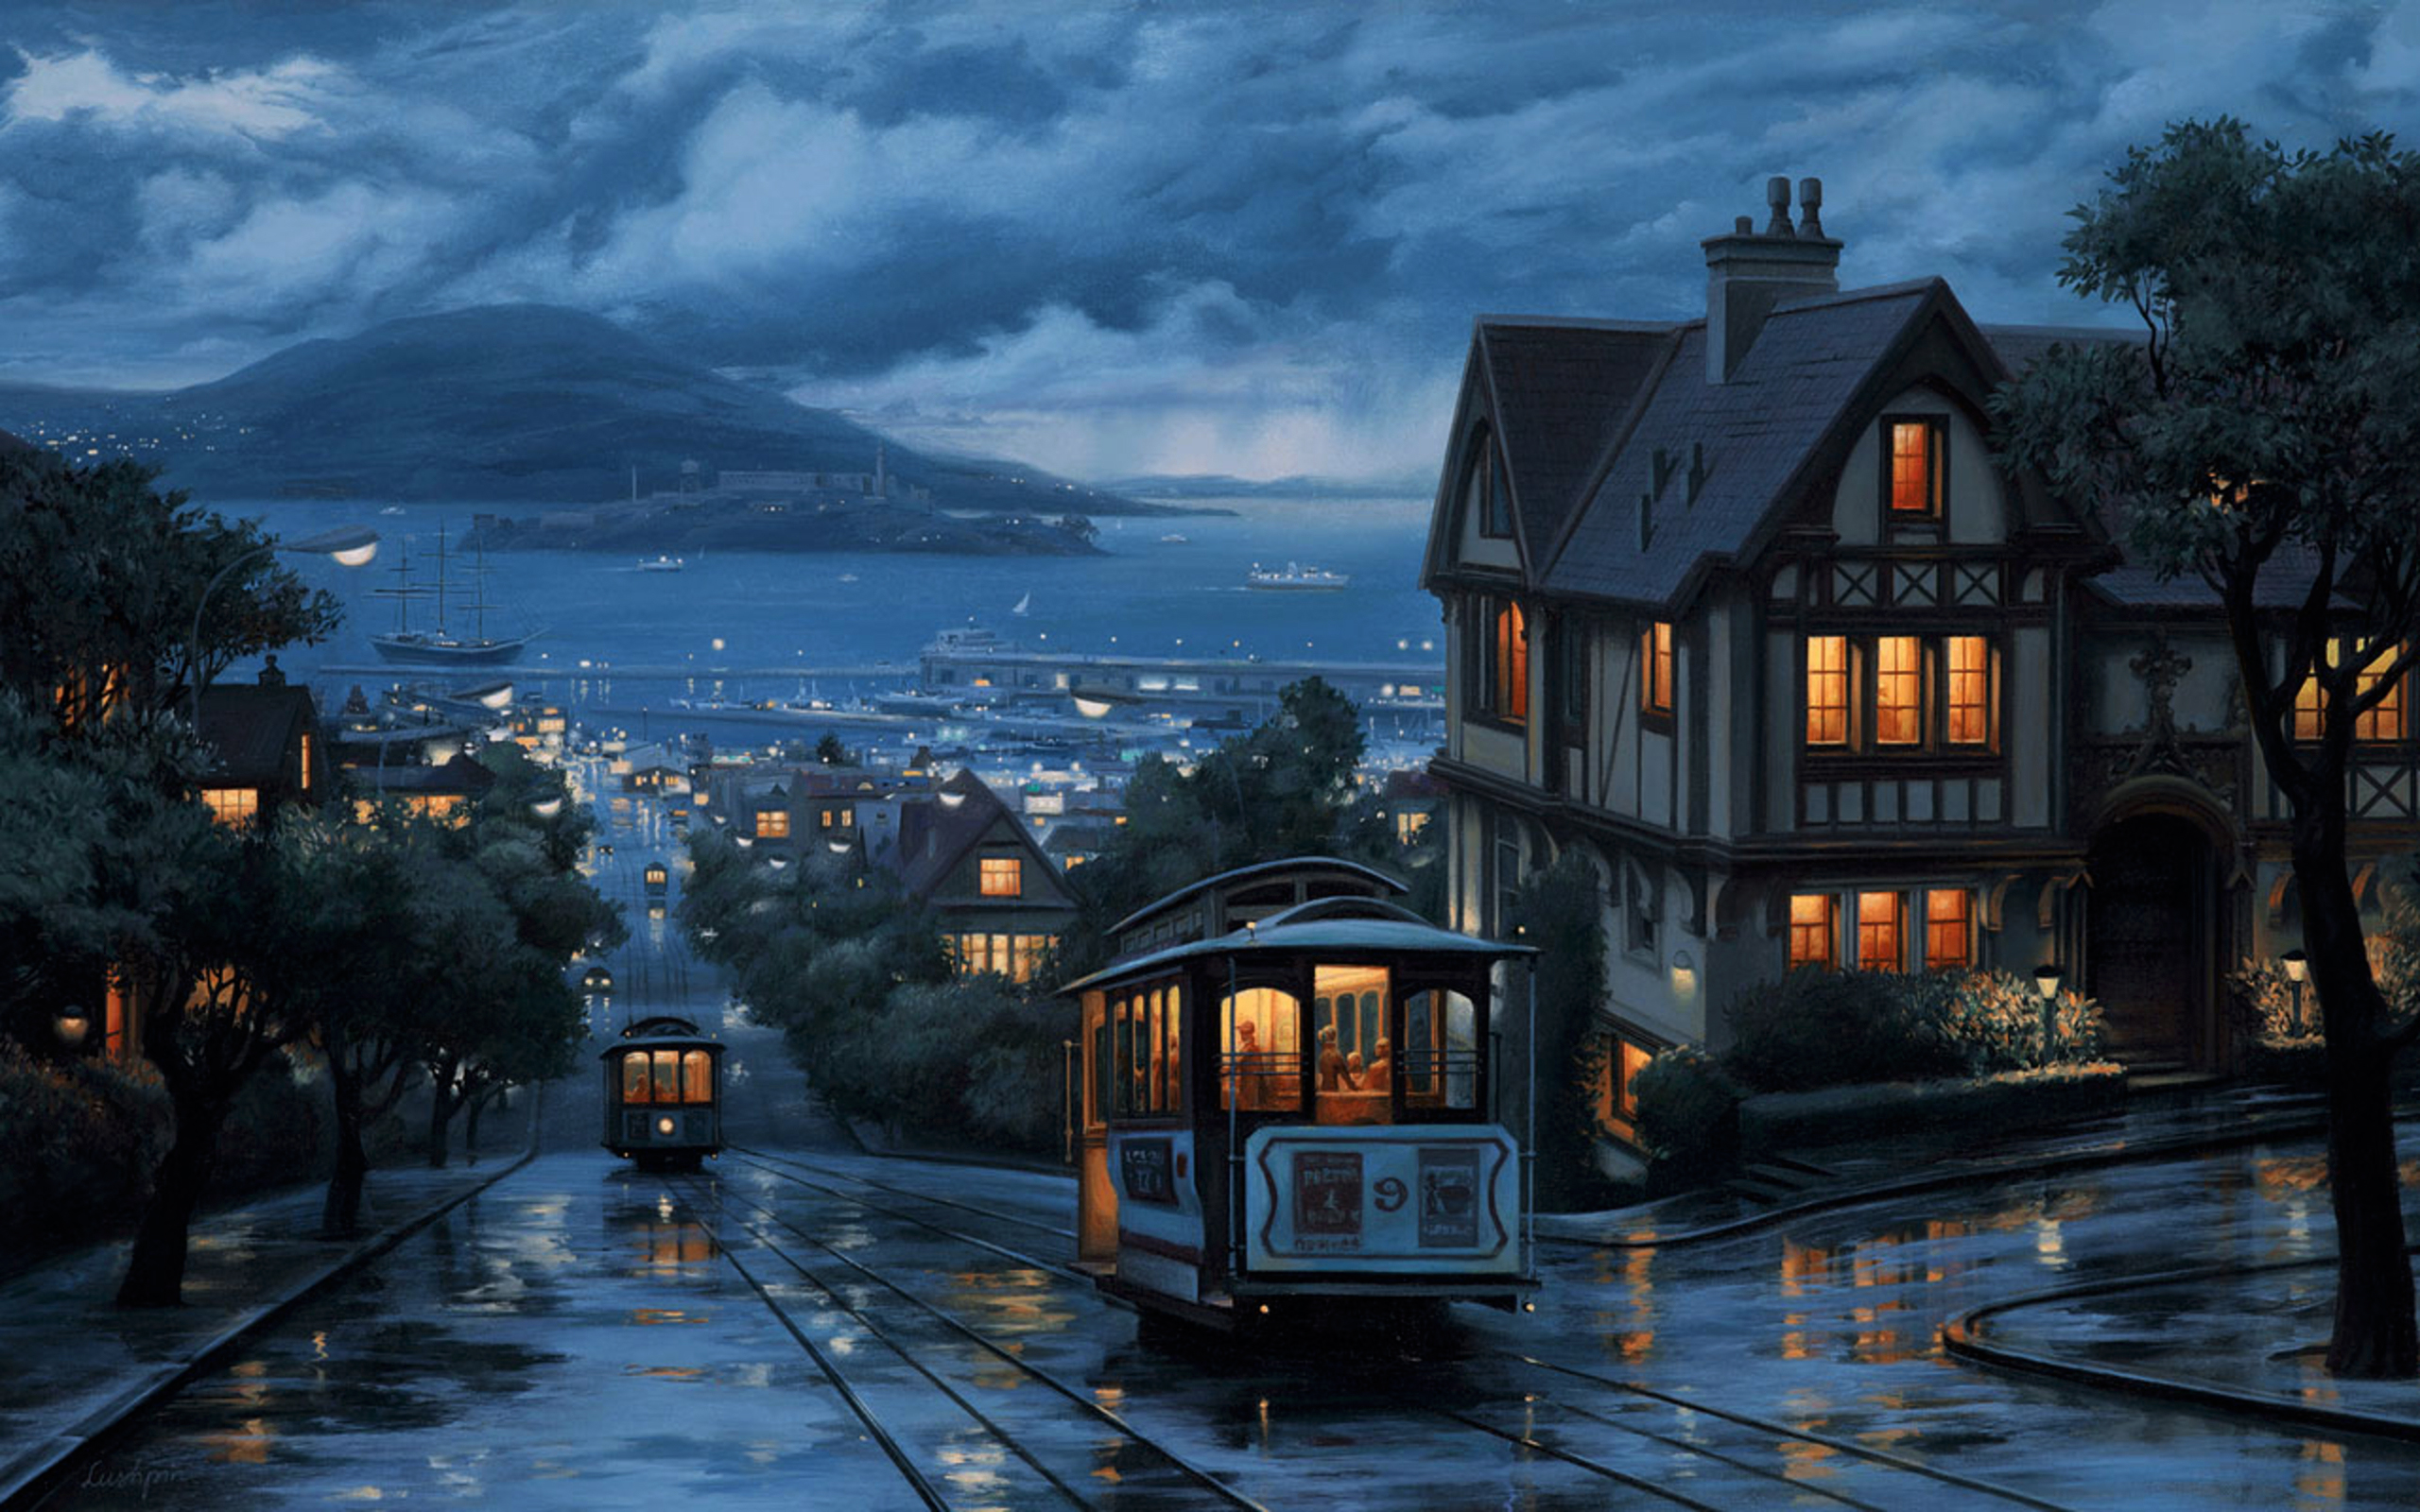 Free Download Cityscape Painting Wallpaper 2560x1600 Id 2560x1600 For Your Desktop Mobile Tablet Explore 56 2560x1600 Wallpapers 2560x1600 Hd Wallpaper 2560x1600 Wallpapers High Resolution Wallpaper 2560x1600